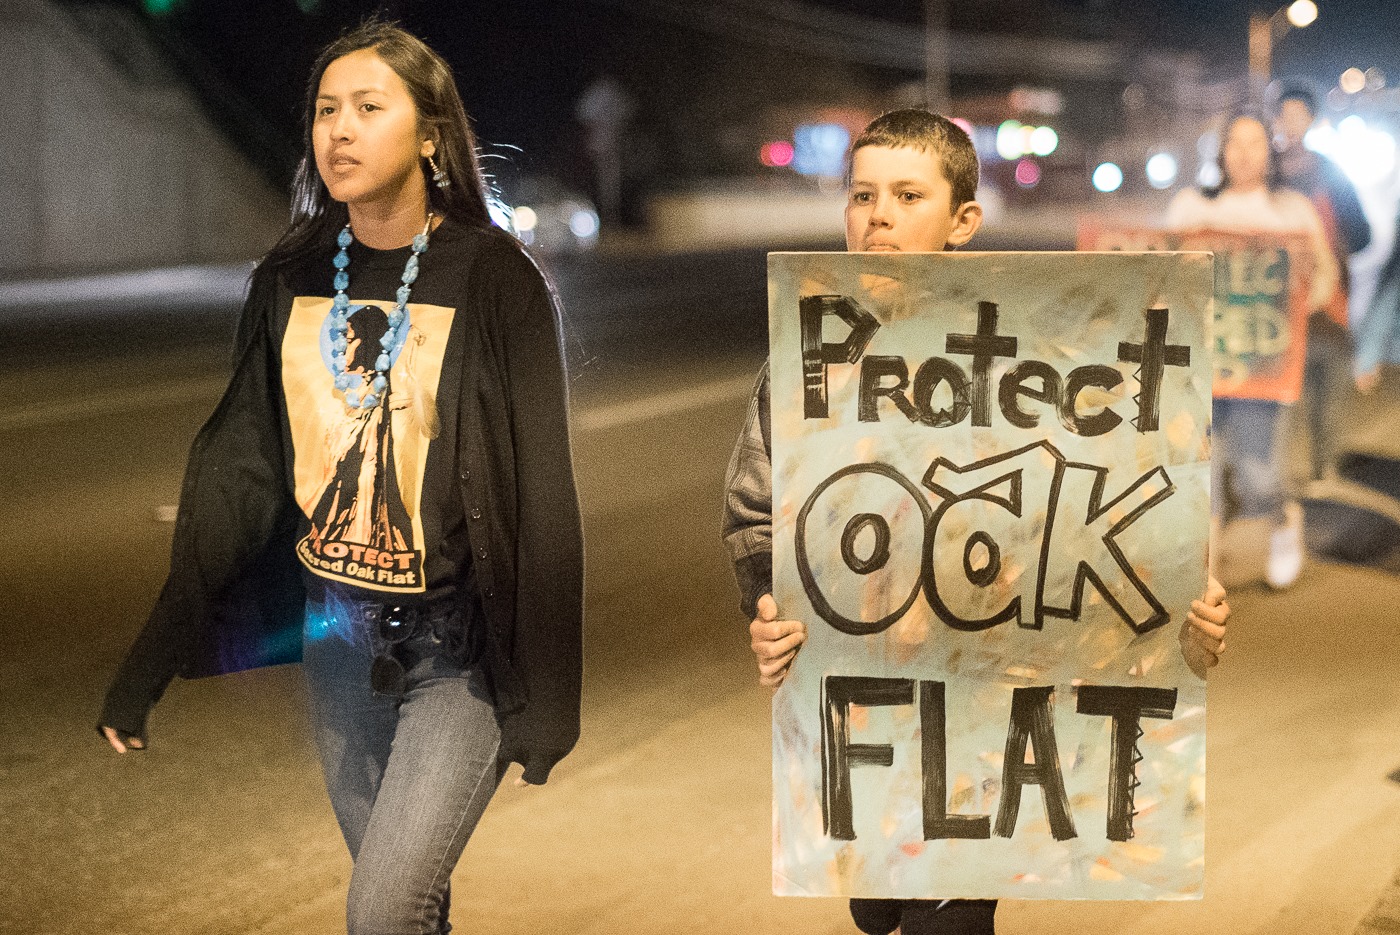 Save Oak Flat caravan plans journey to DC to protect sacred site